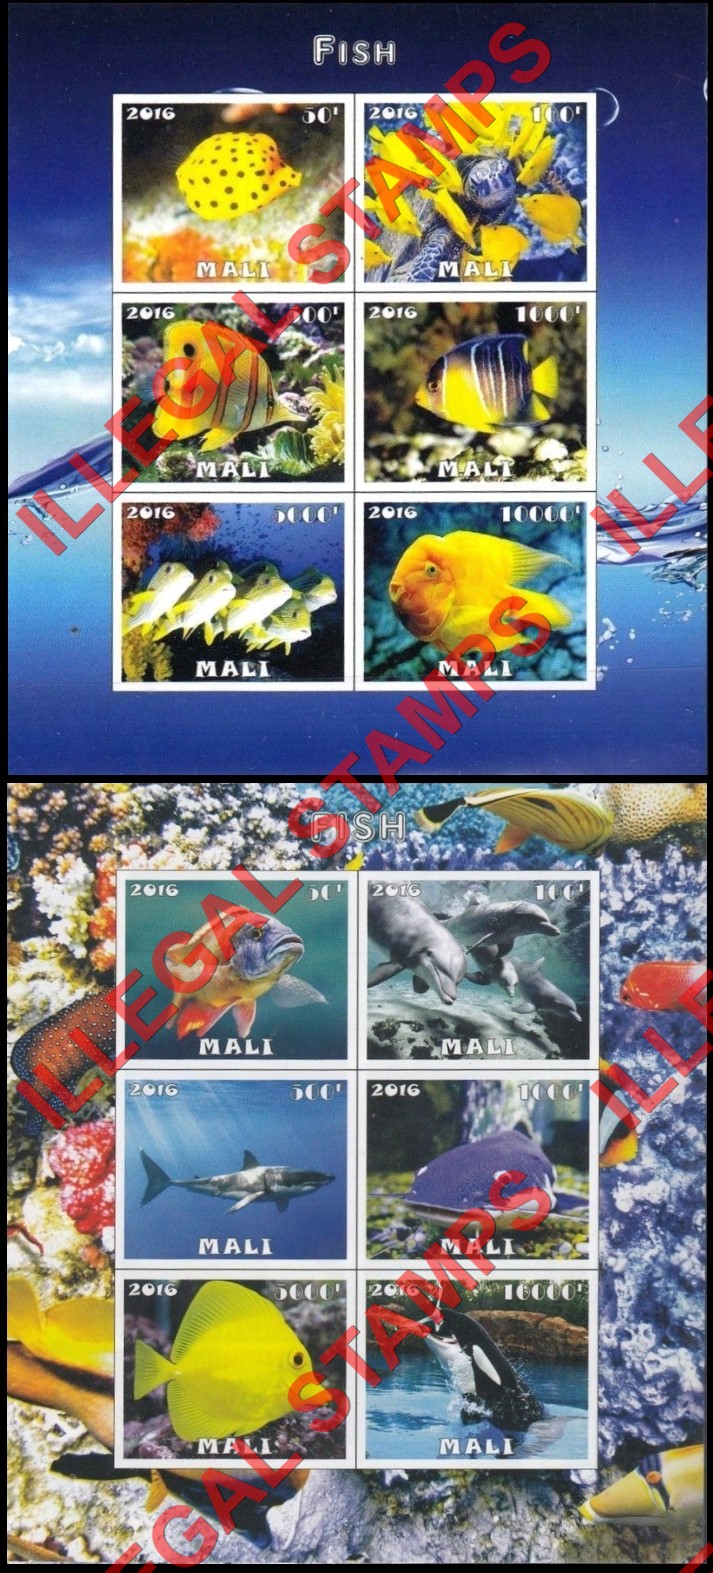 Mali 2016 Fish Illegal Stamp Souvenir Sheets of 6